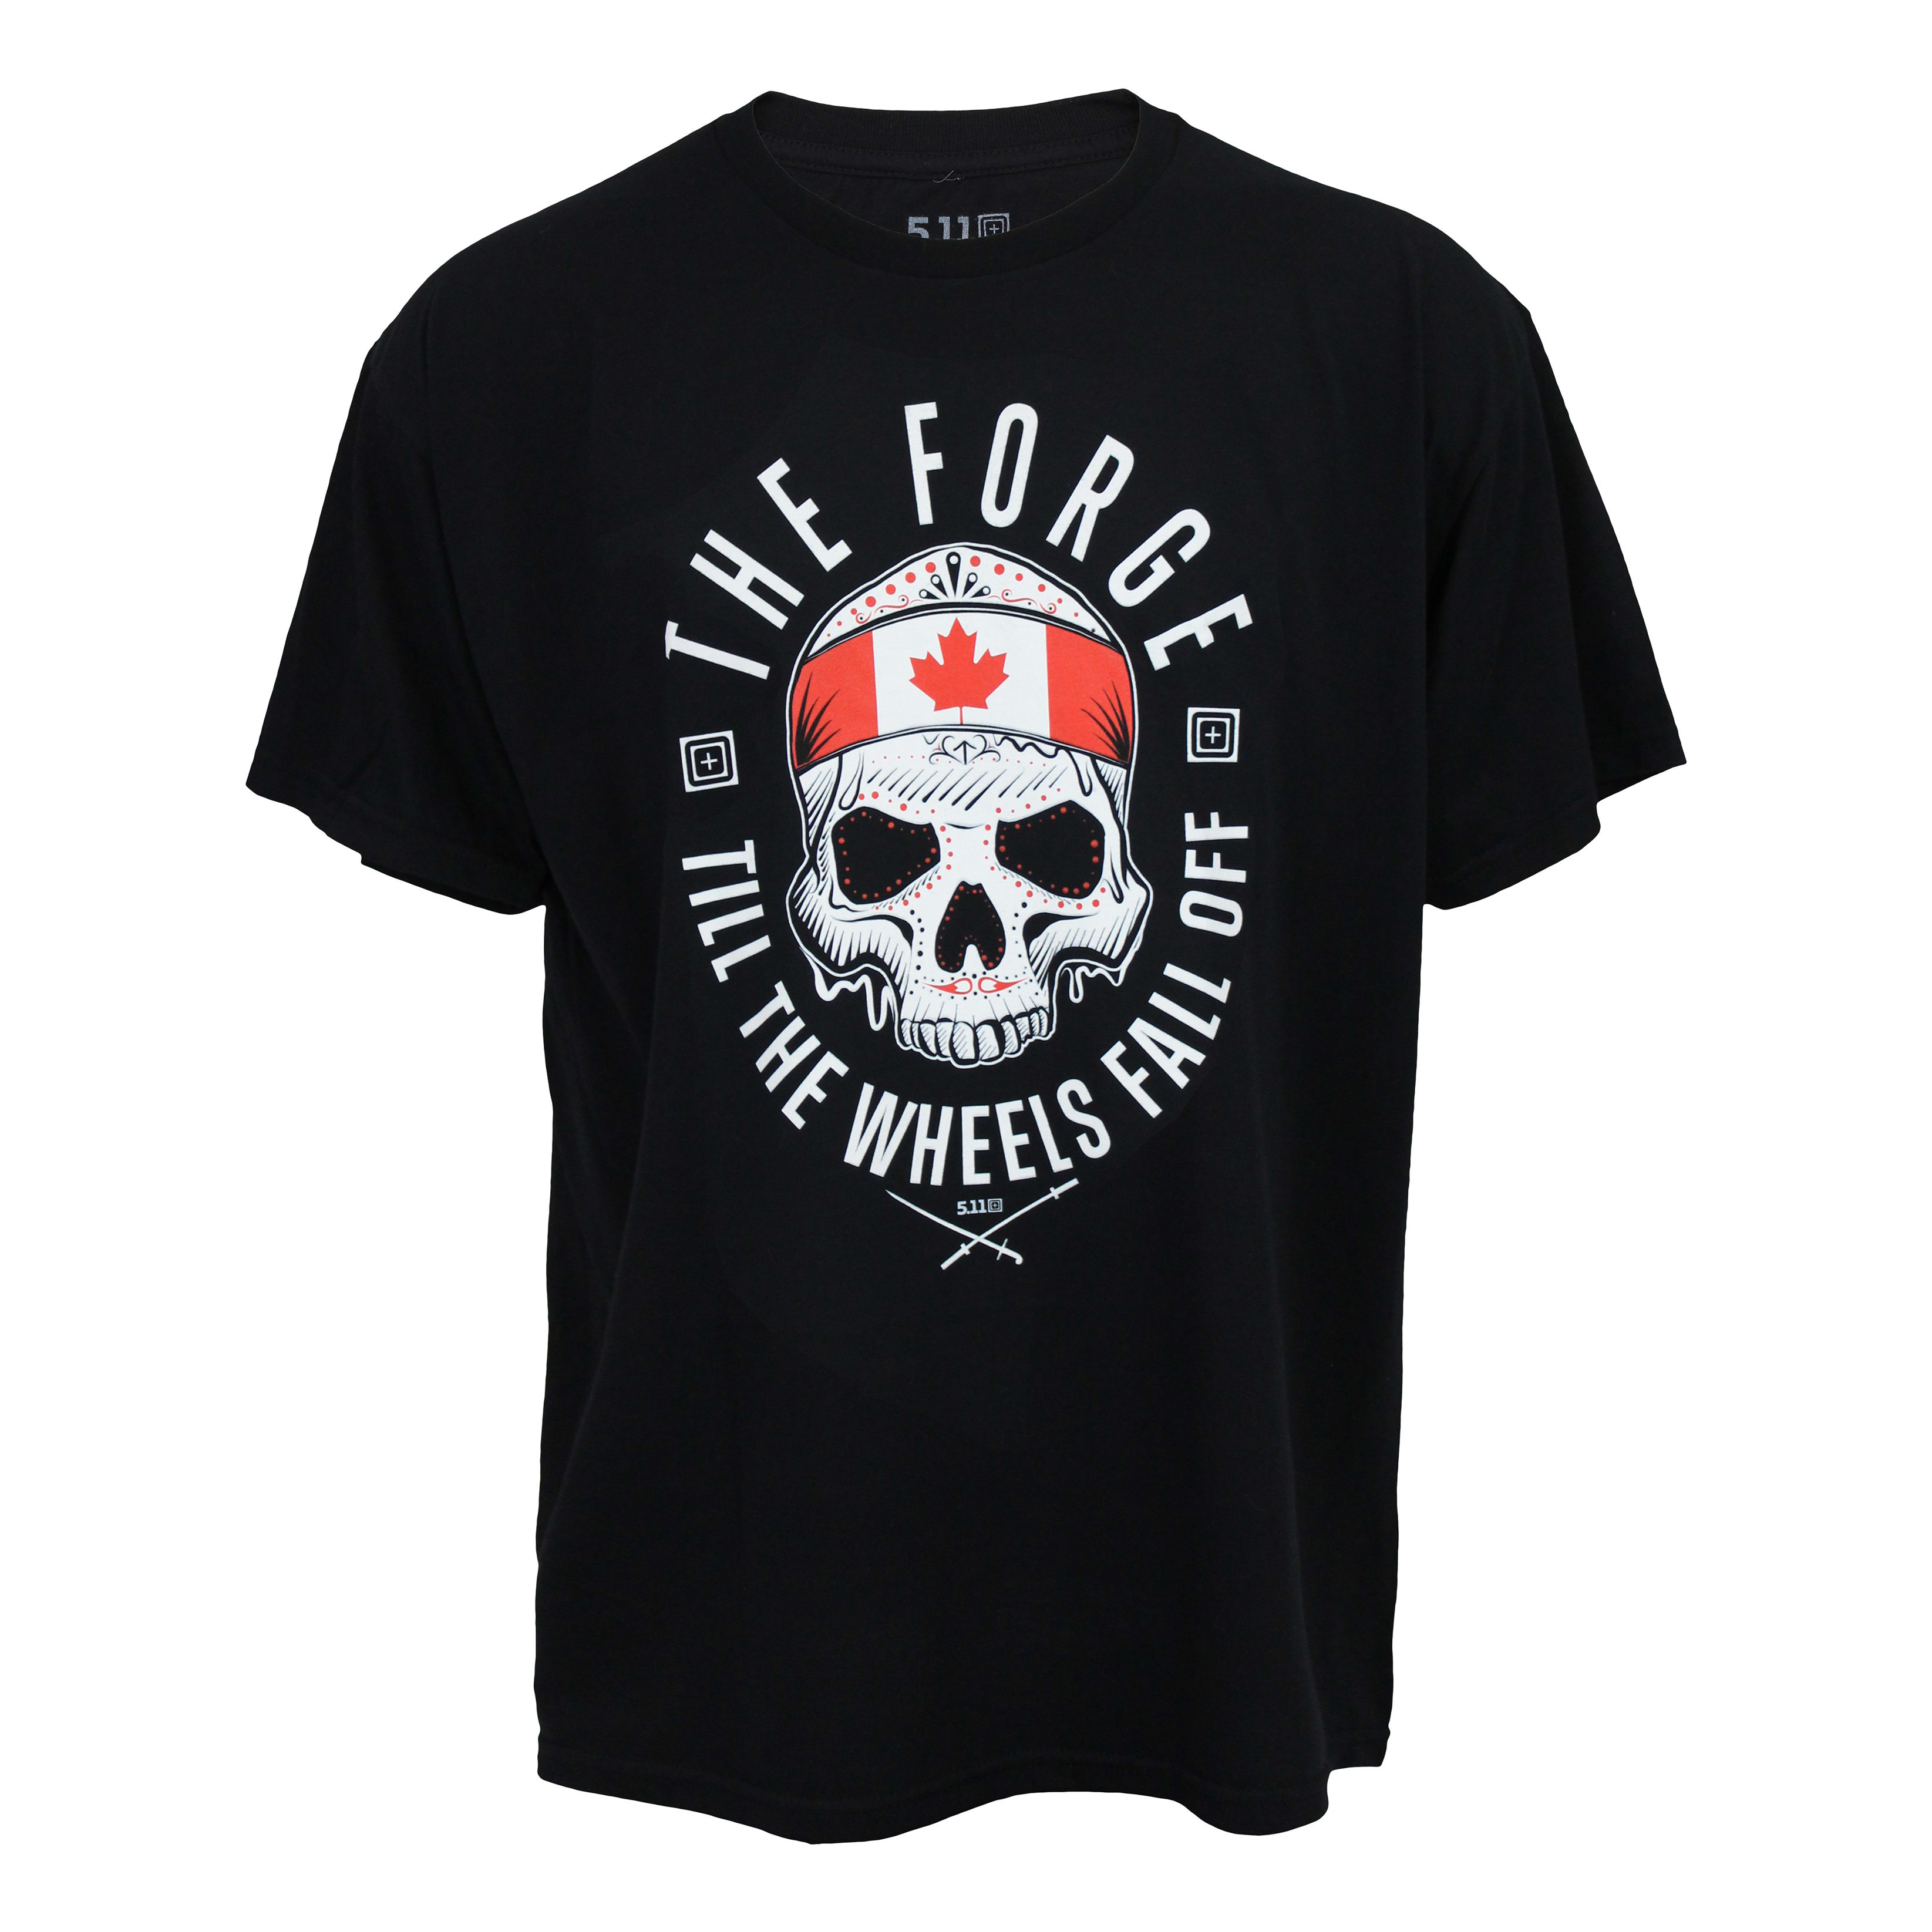 5.11® Men’s Canada Forge Short-Sleeve T-Shirt